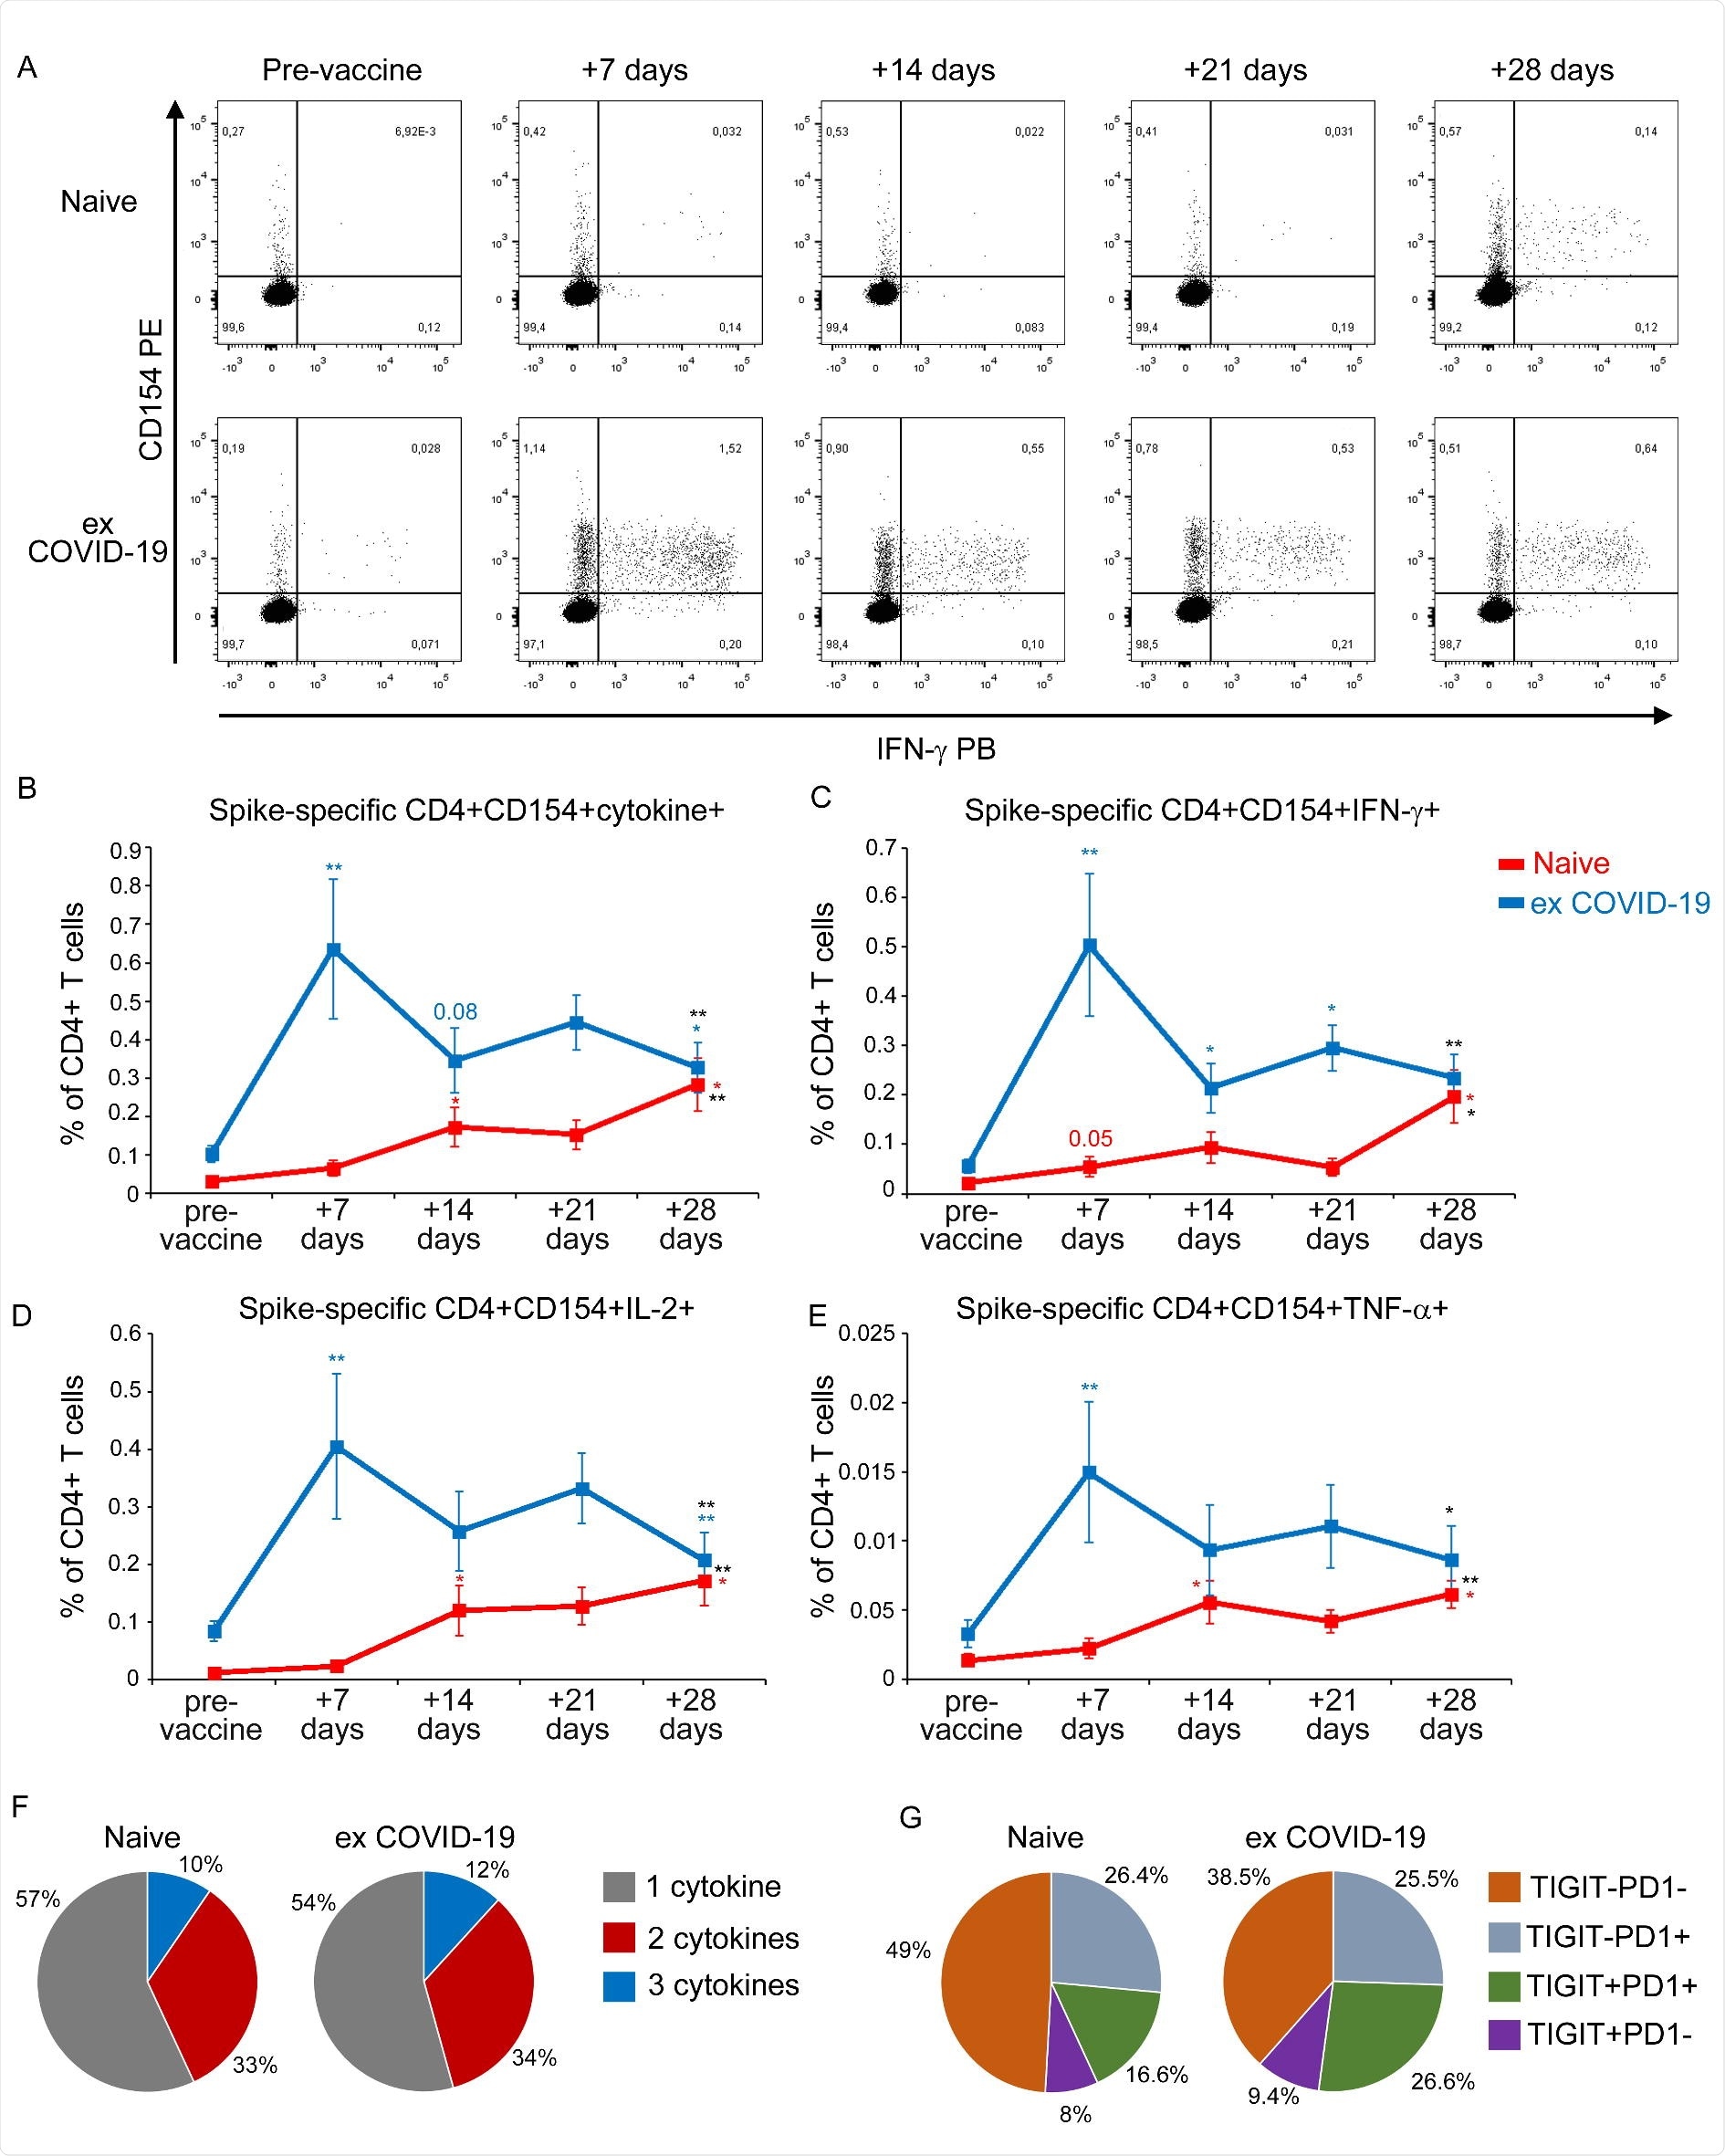 Detection of Spike-specific circulating CD4+ T cells in naïve and ex COVID19 vaccinated subjects A) Representative flow cytometric plots of Spike-specific CD4+ CD154+ IFN-γ+ T cells in one naïve (upper row) and one ex COVID-19 (lower row) subject before vaccination and after 7, 14, 21, 28 days from the first injection. Kinetic analysis of frequencies of CD154+ cells producing at least one cytokine among IL-2, IFN-γ and TNF-α (B), CD154+ IFN-γ+ (C), CD154+ IL-2+ (D), CD154+ TNF-α+ (E) Spike-specific T cells in naïve (red lines) and ex COVID-19 (blue lines) subjects, before and after vaccination. Data are represented as mean ±SE from 11 naïve and 11 ex COVID-19 subjects, subtracted of background unstimulated negative control. Blue and red asterisks refer to paired statistics within each study group compared to the previous time point in the kinetic. Black asterisks at day 28 represent paired statistic compared to pre-vaccine point. *= p<0.05; **= p<0.01; ***= p<0.001. (F) Characterization of SARS-CoV-2 Spike-specific CD4+ T cell polyfunctionality in naïve and ex COVID-19 subjects at day 28 following the first vaccine injection. Results are expressed as mean percentages from 11 naïve and 11 ex COVID-19 subjects. (G) Characterization of TIGIT and PD1 expression by SARS-CoV-2 Spike-specific CD4+ T cells in 7 naïve and 8 ex COVID-19 subjects. Results are expressed as mean percentages.